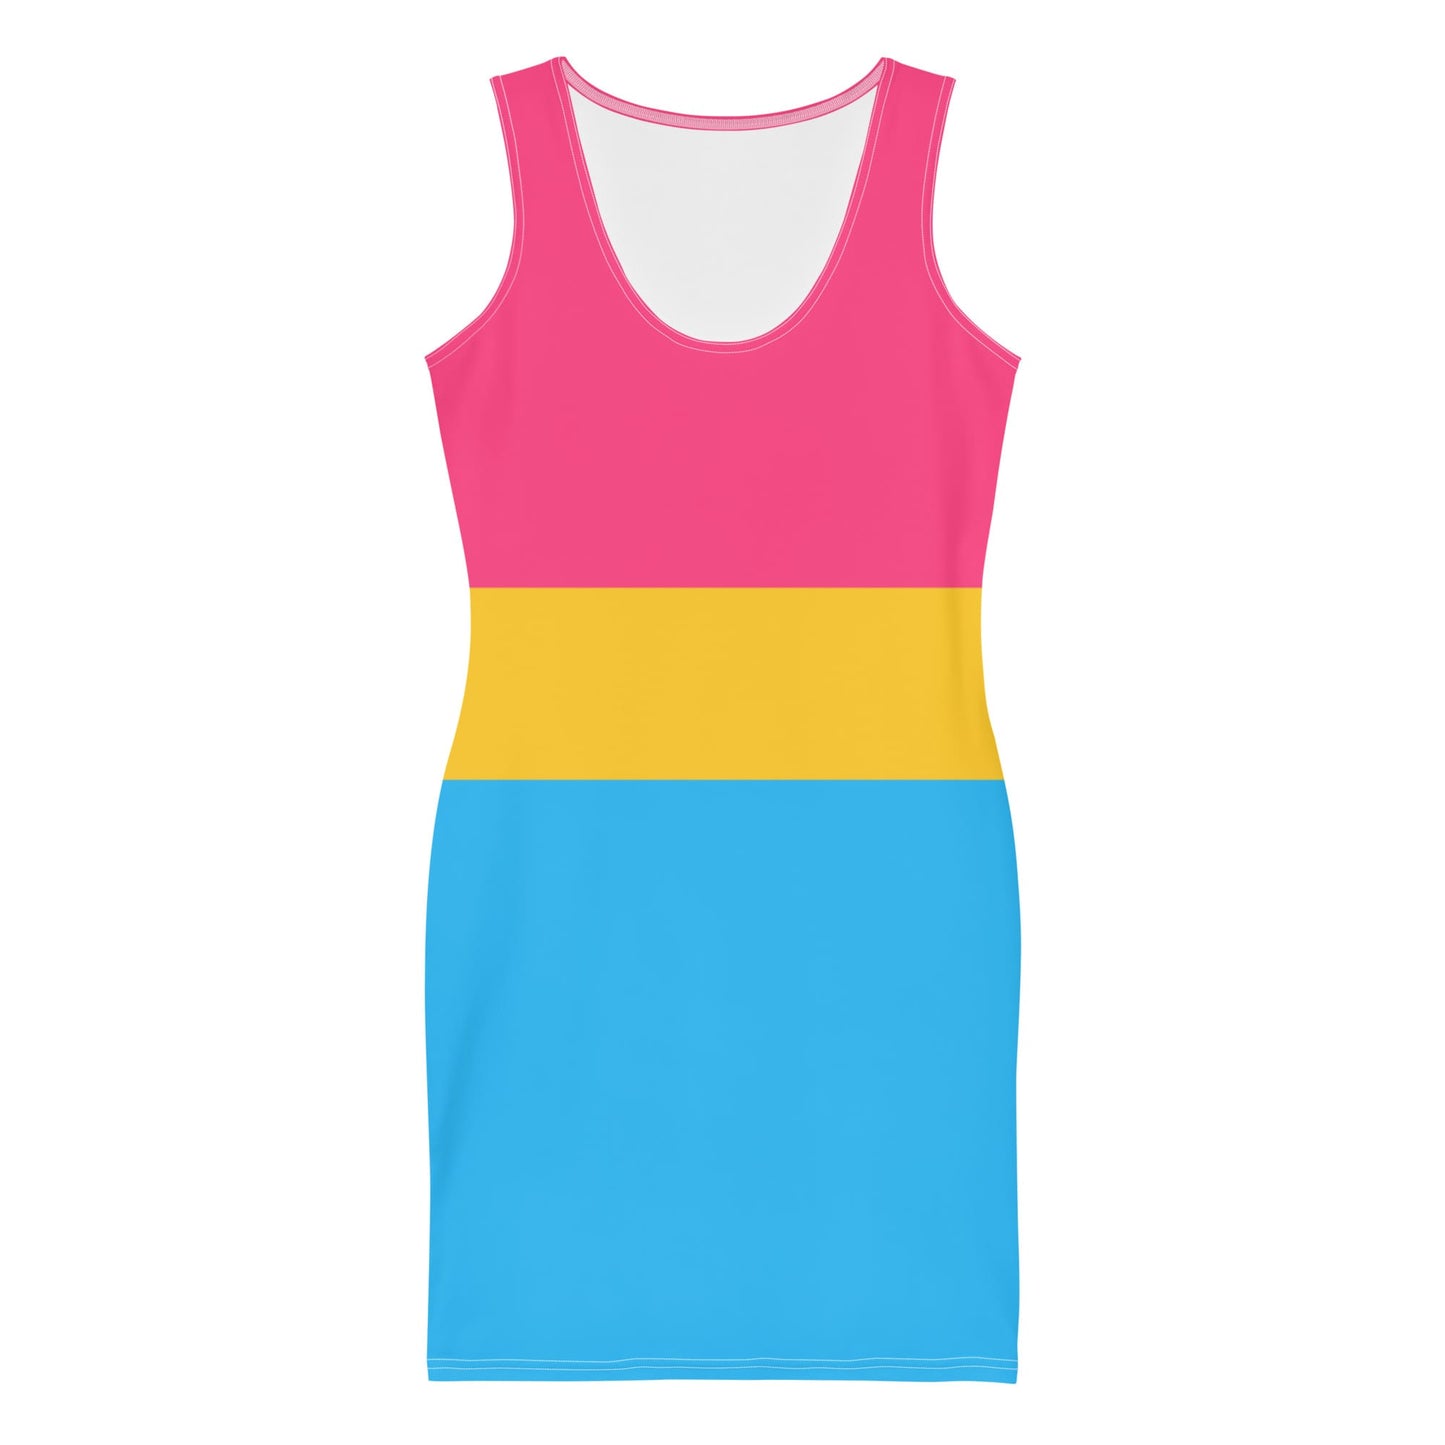 pansexual dress, flatlay front